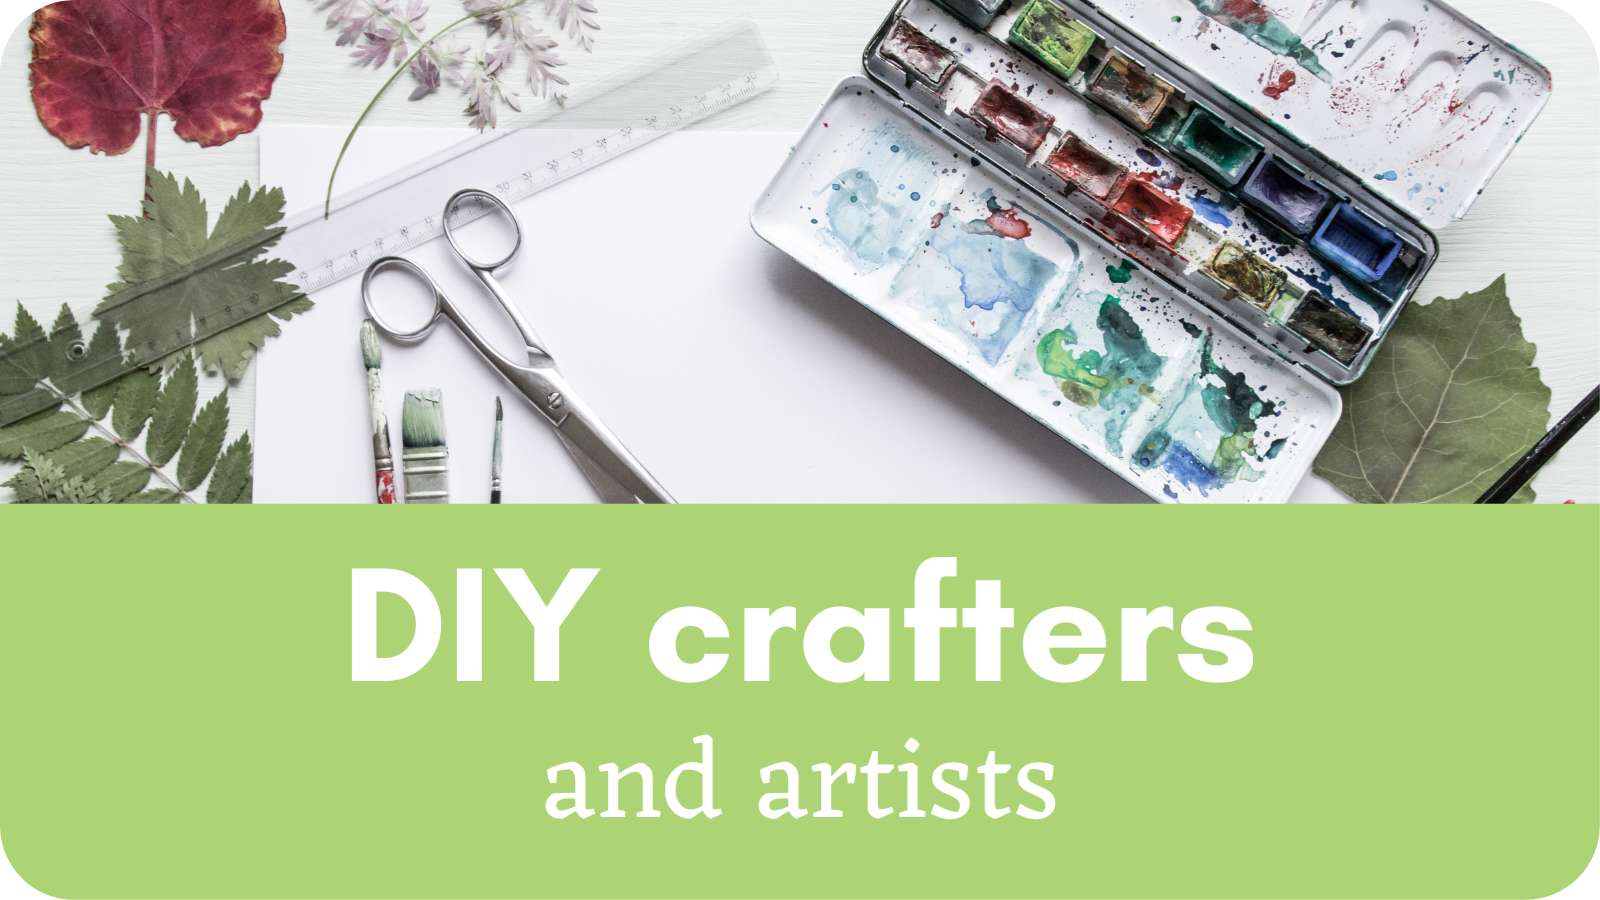 DIY crafters and artists